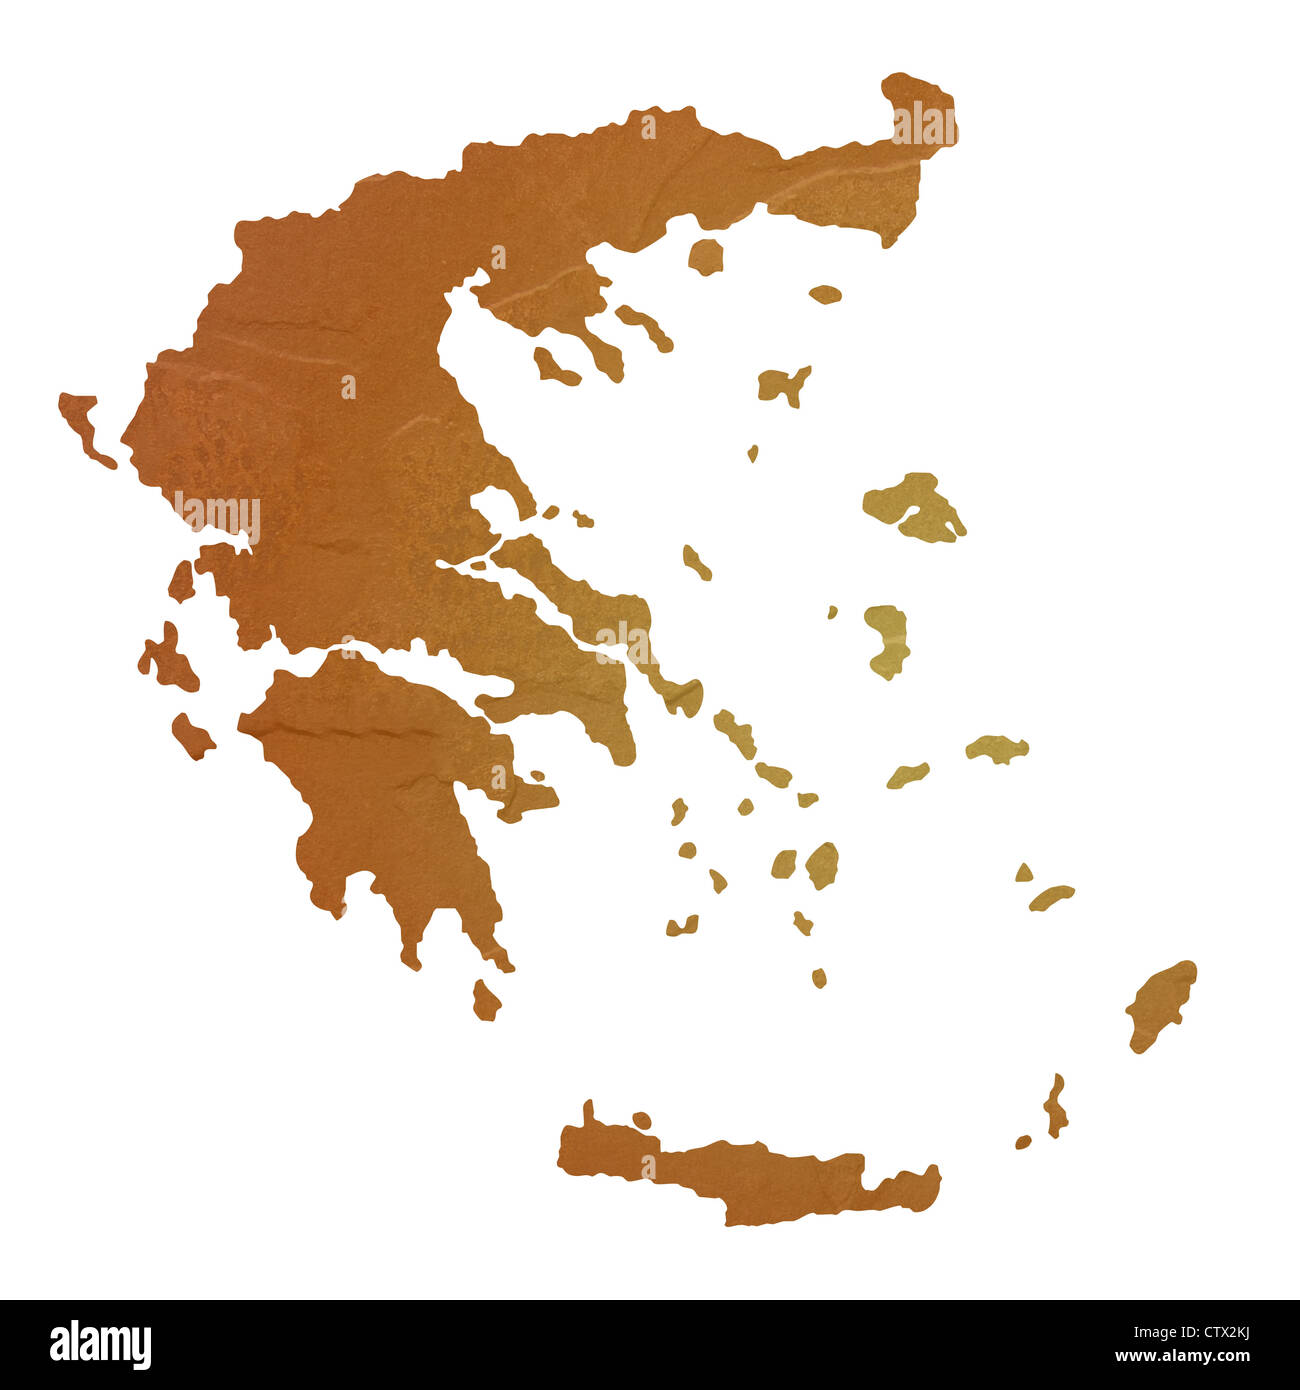 Textured map of Greece map with brown rock or stone texture, isolated on white background with clipping path. Stock Photo